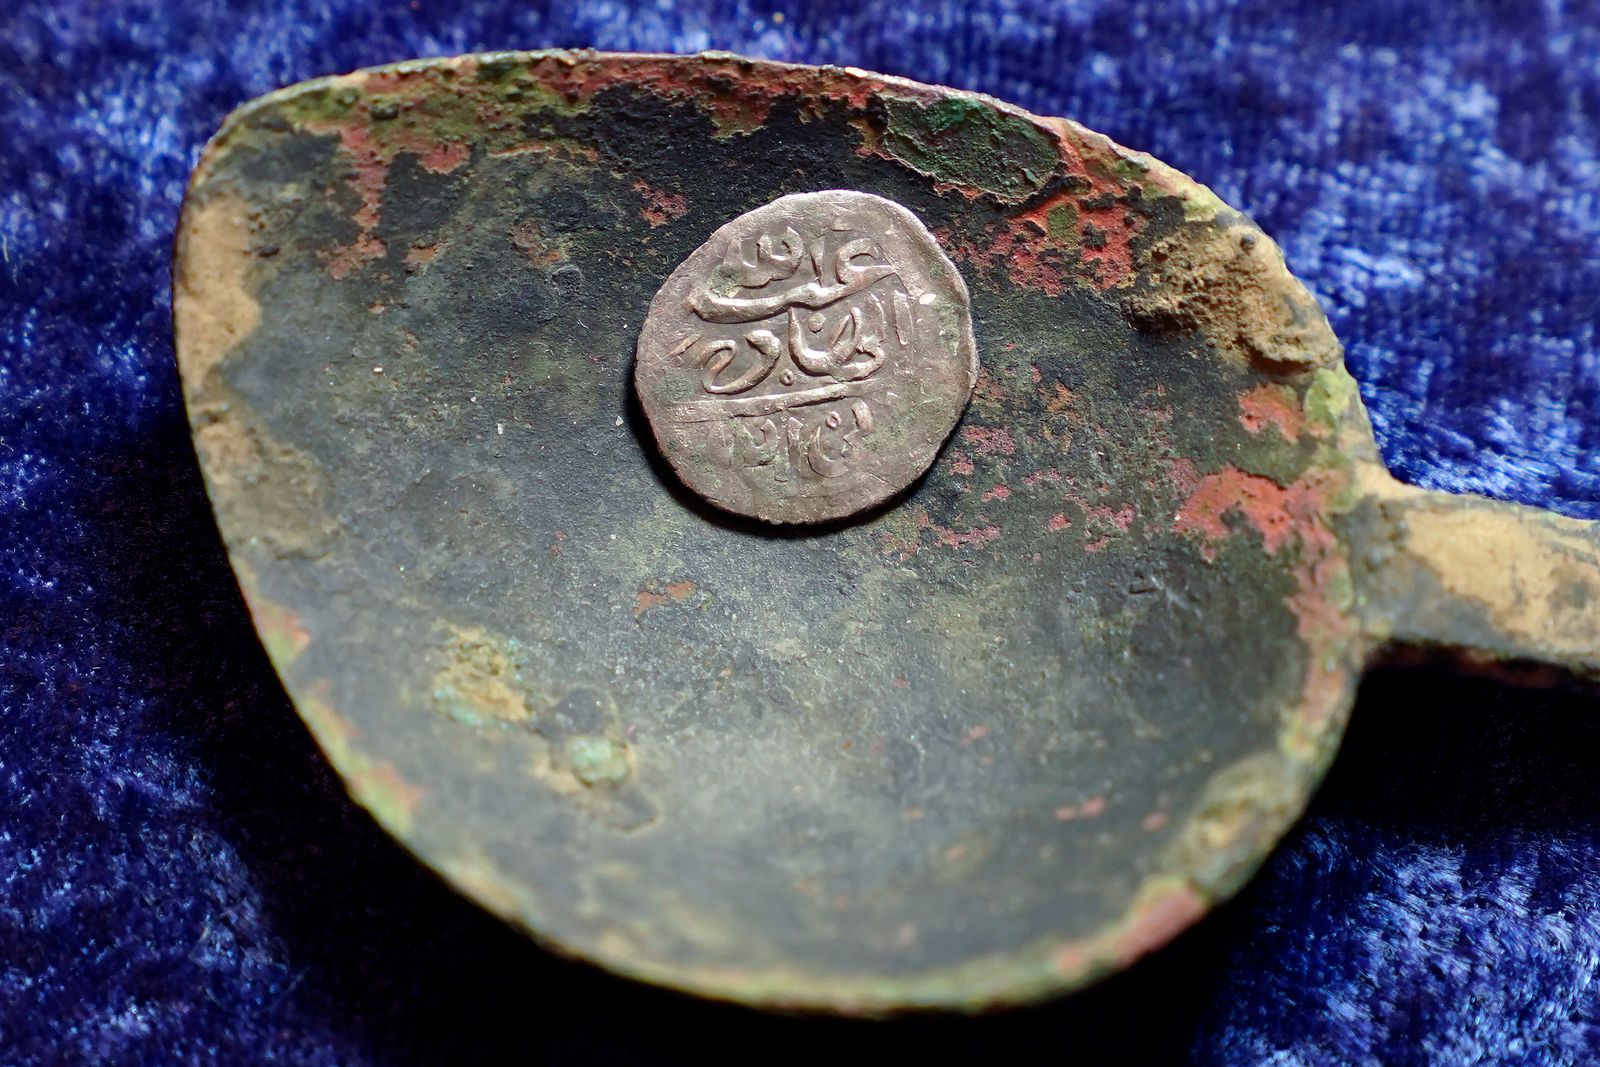 A 17th century Arabian silver coin that research shows was struck in 1693 in Yemen, rests in a 17th century brass spoon on a table, in Warwick, R.I., Thursday, March 11, 2021. The coin was found at a farm, in Middletown, R.I., in 2014 by metal detectorist Jim Bailey, who contends it was plundered in 1695 by English pirate Henry Every from Muslim pilgrims sailing home to India after a pilgrimage to Mecca. (AP Photo/Steven Senne) - AP